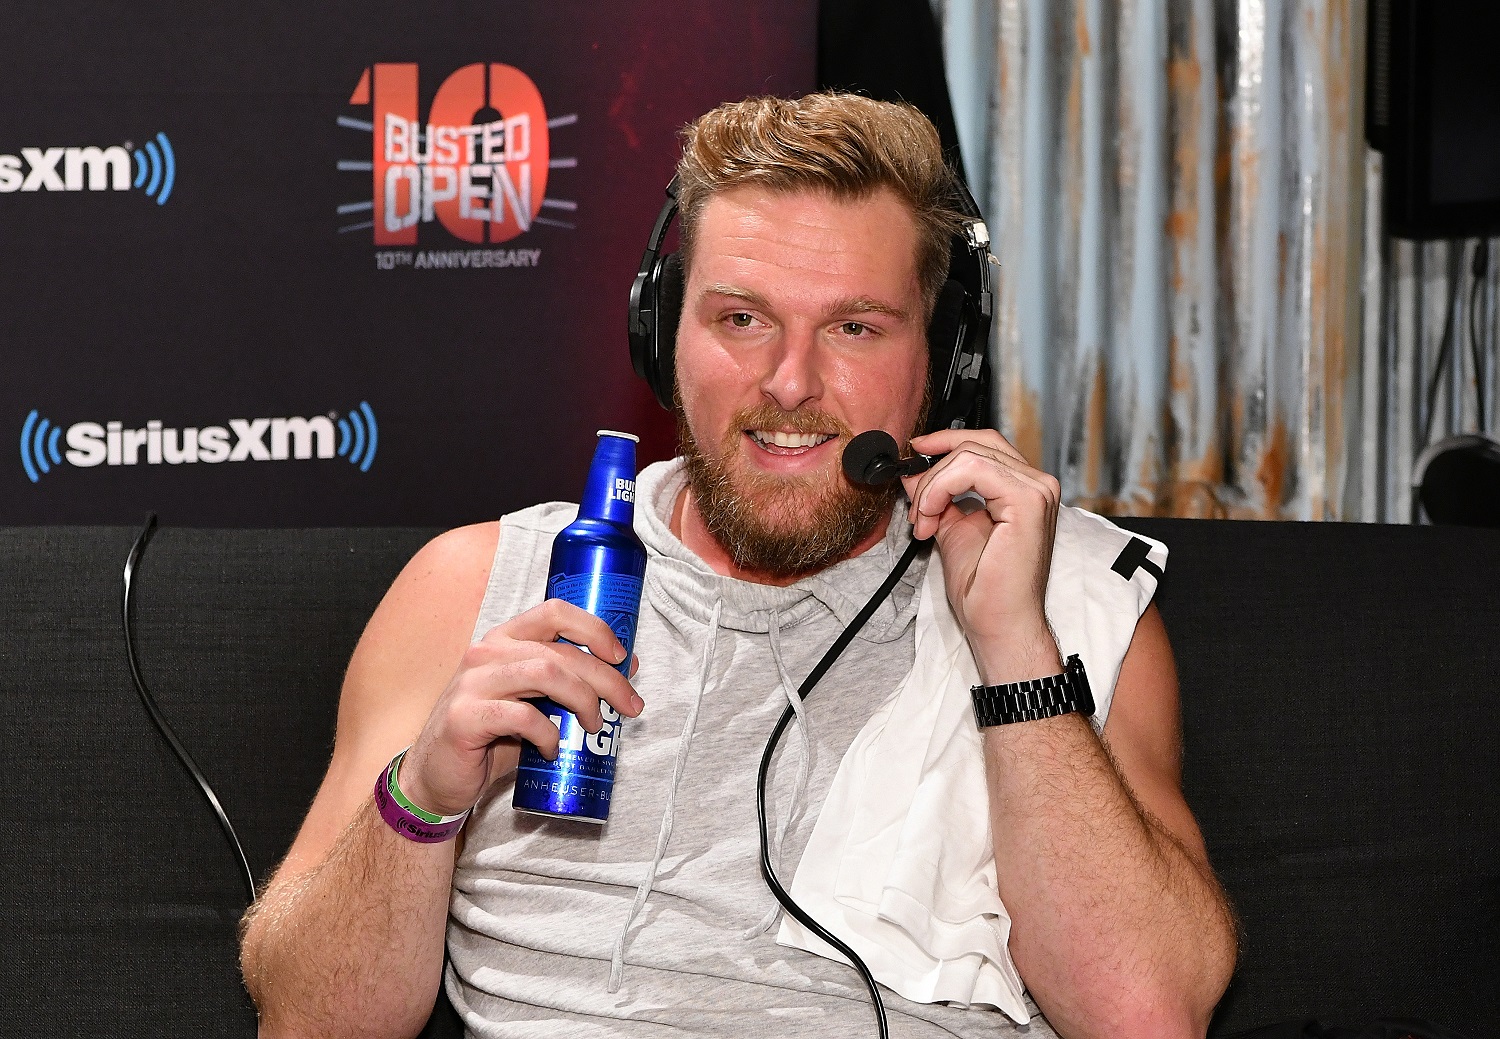 Former Indianapolis Colts punter Pat McAfee attends SiriusXM's 'Busted Open,' celebrating its 10th anniversary In New York City on the eve of WrestleMania 35 on April 6, 2019.  | Slaven Vlasic/Getty Images for SiriusXM